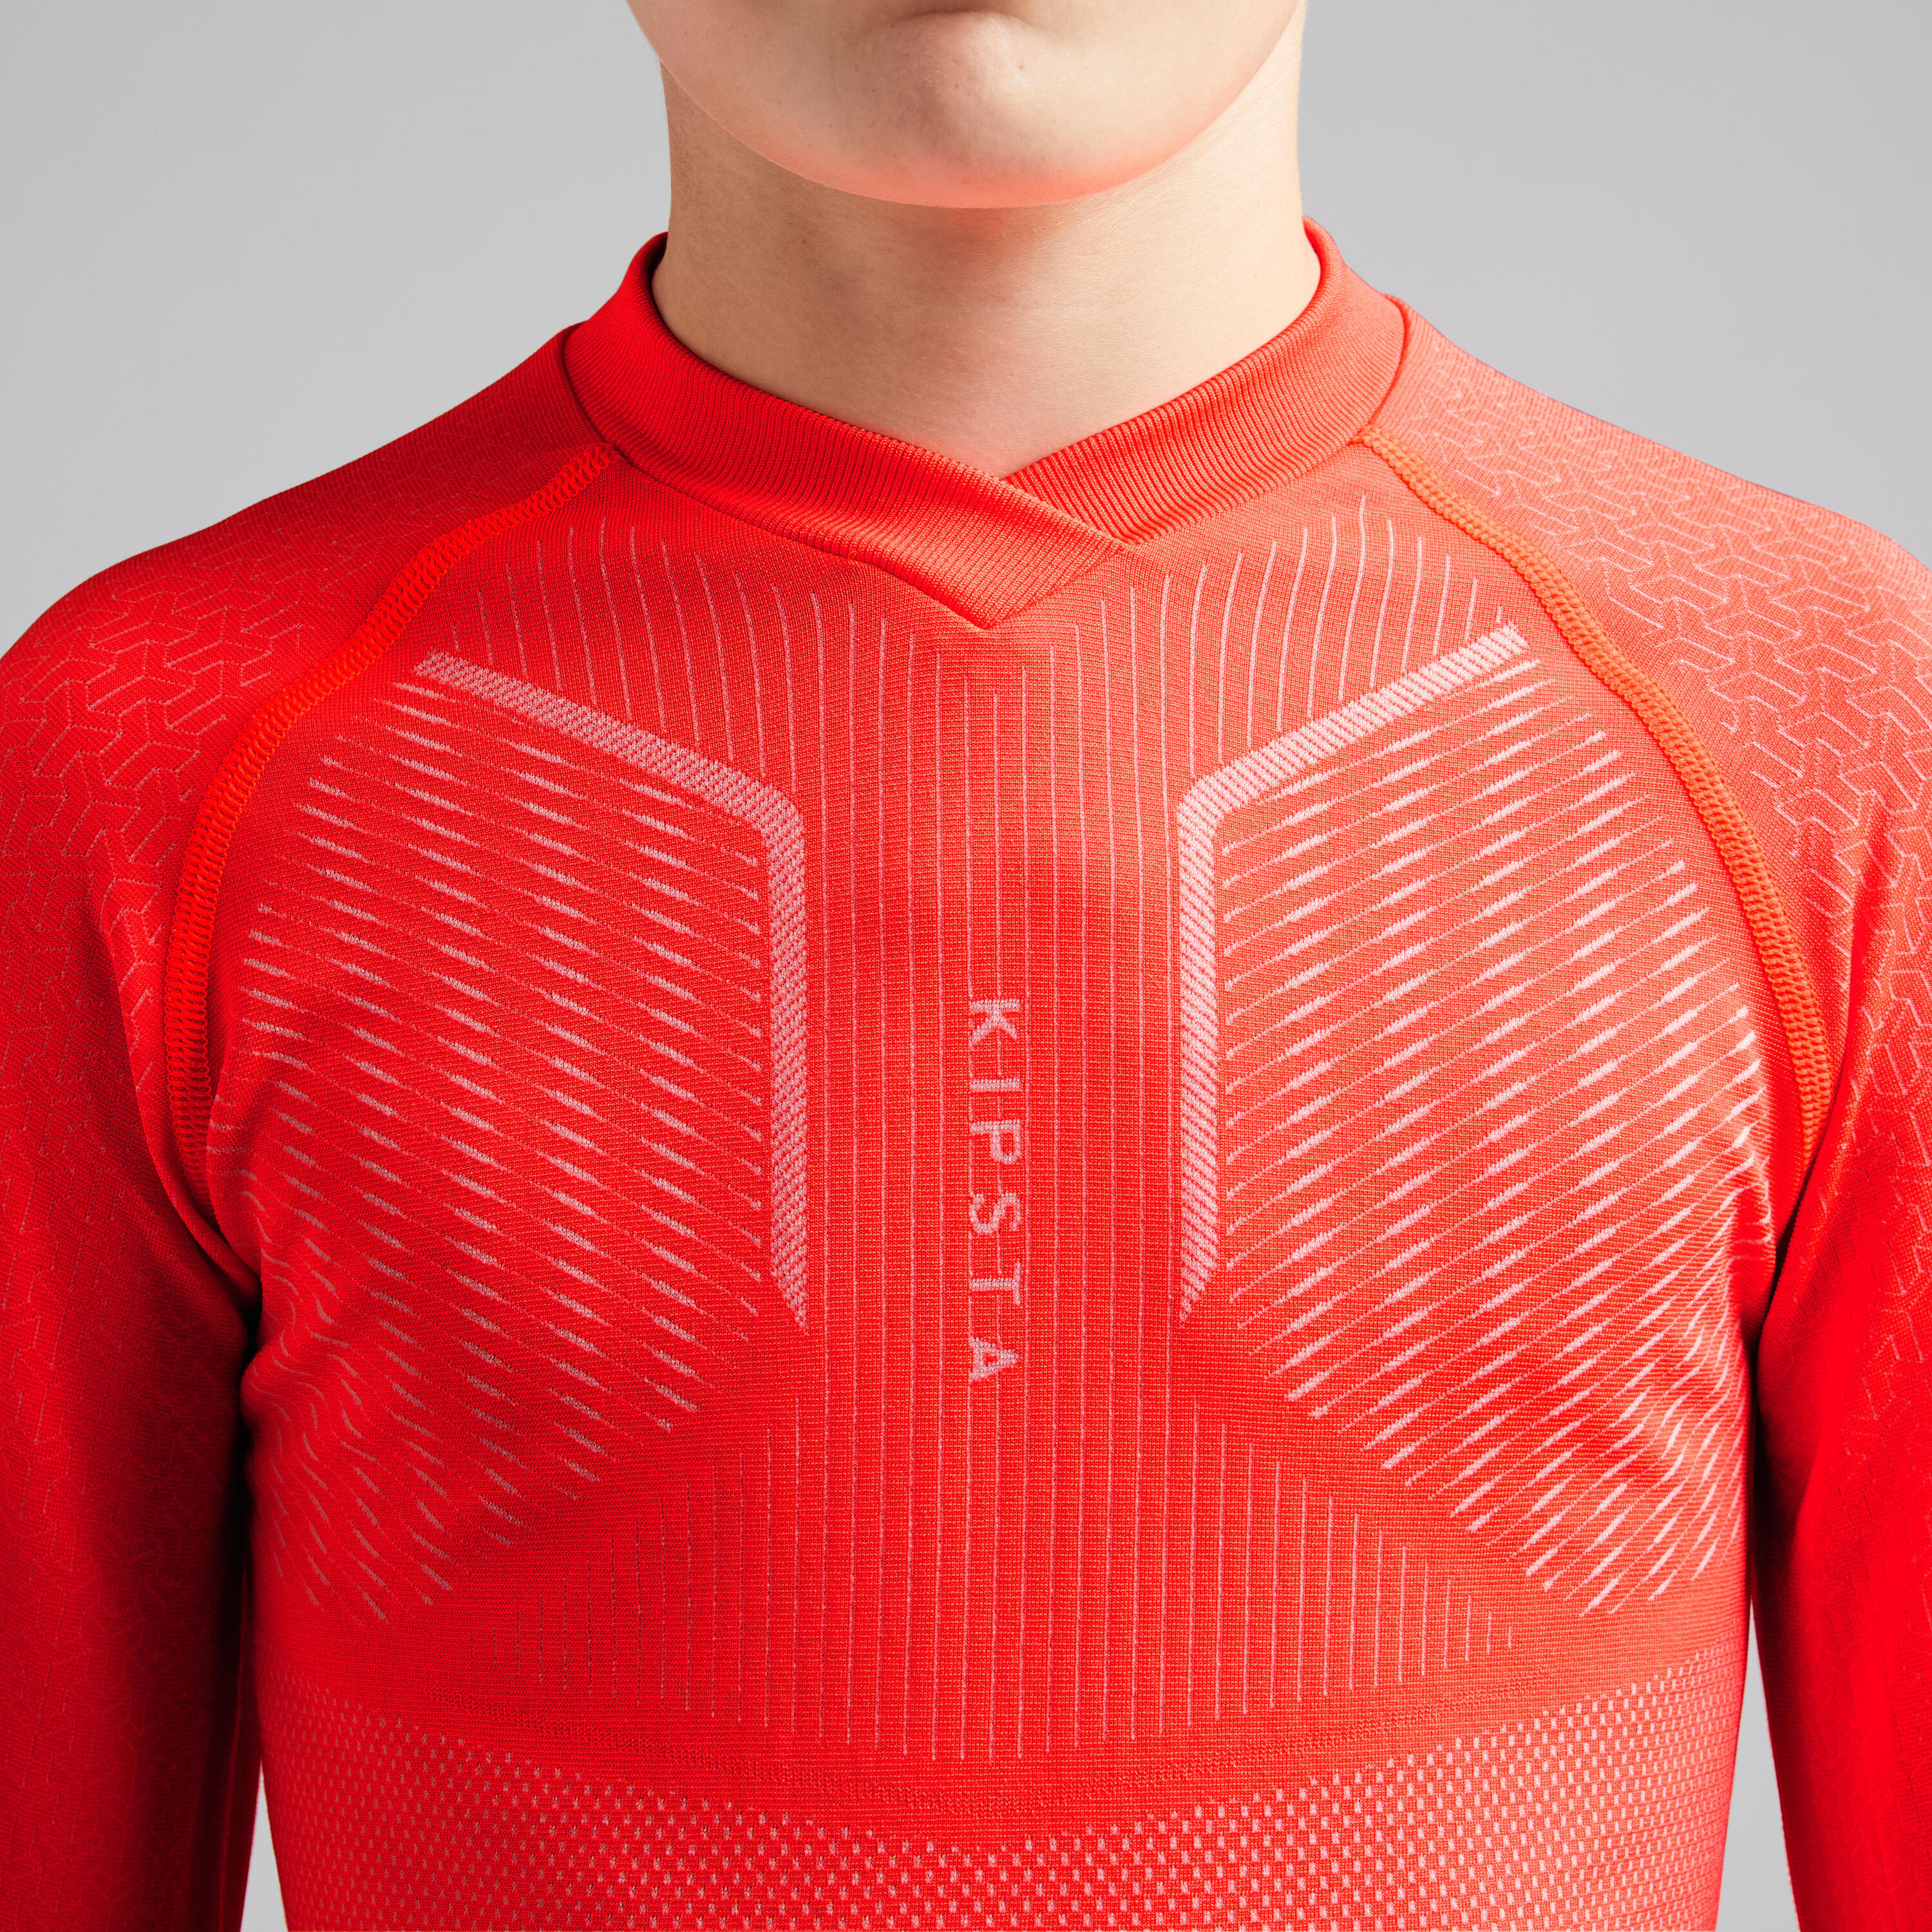 Kids' Long-Sleeved Football Base Layer Top Keepdry 500 - Red 5/9